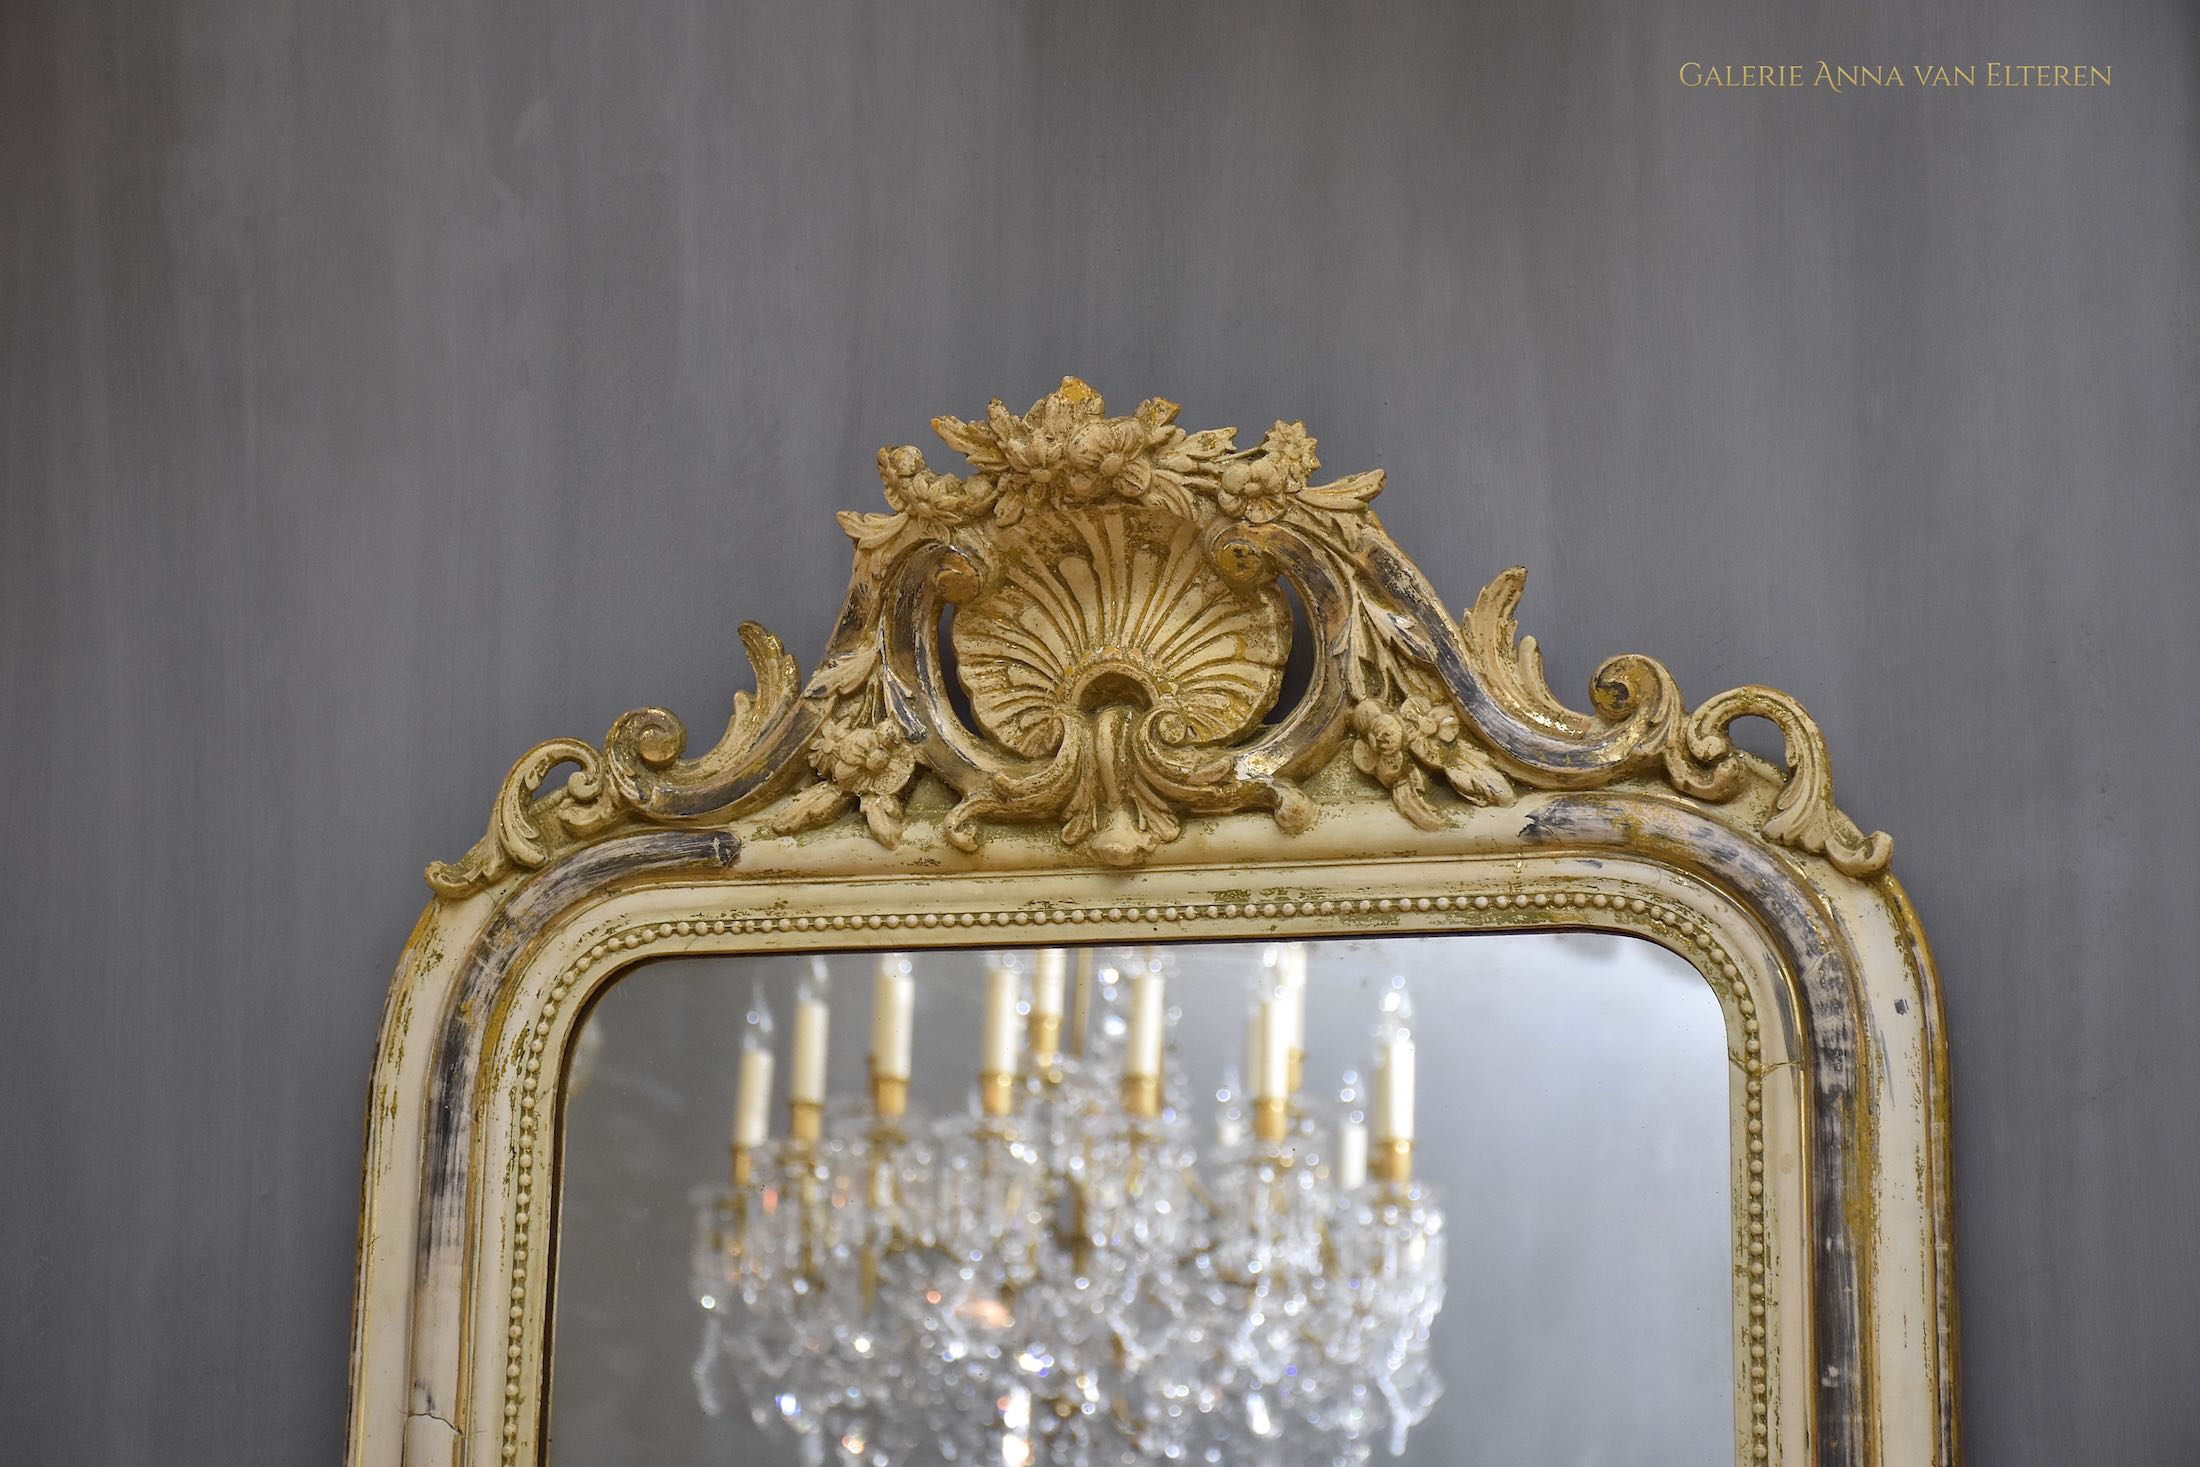 19th c. antique French mirror with a crest